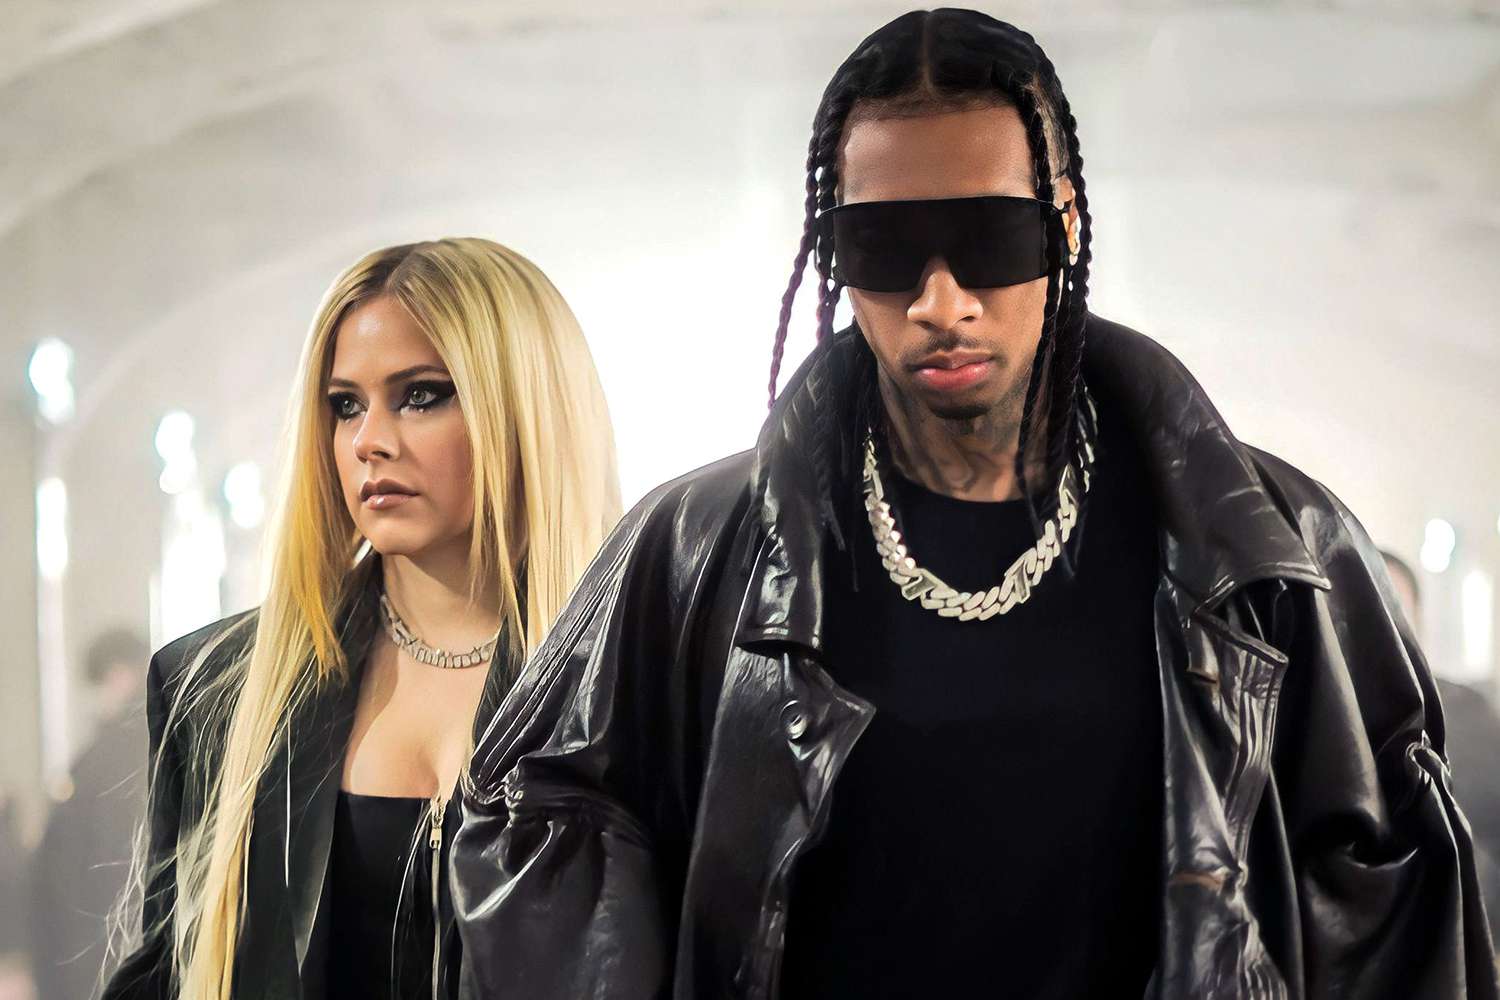 Avril Lavigne Upskirt - Tyga and Avril Lavigne's Relationship Comes to an End